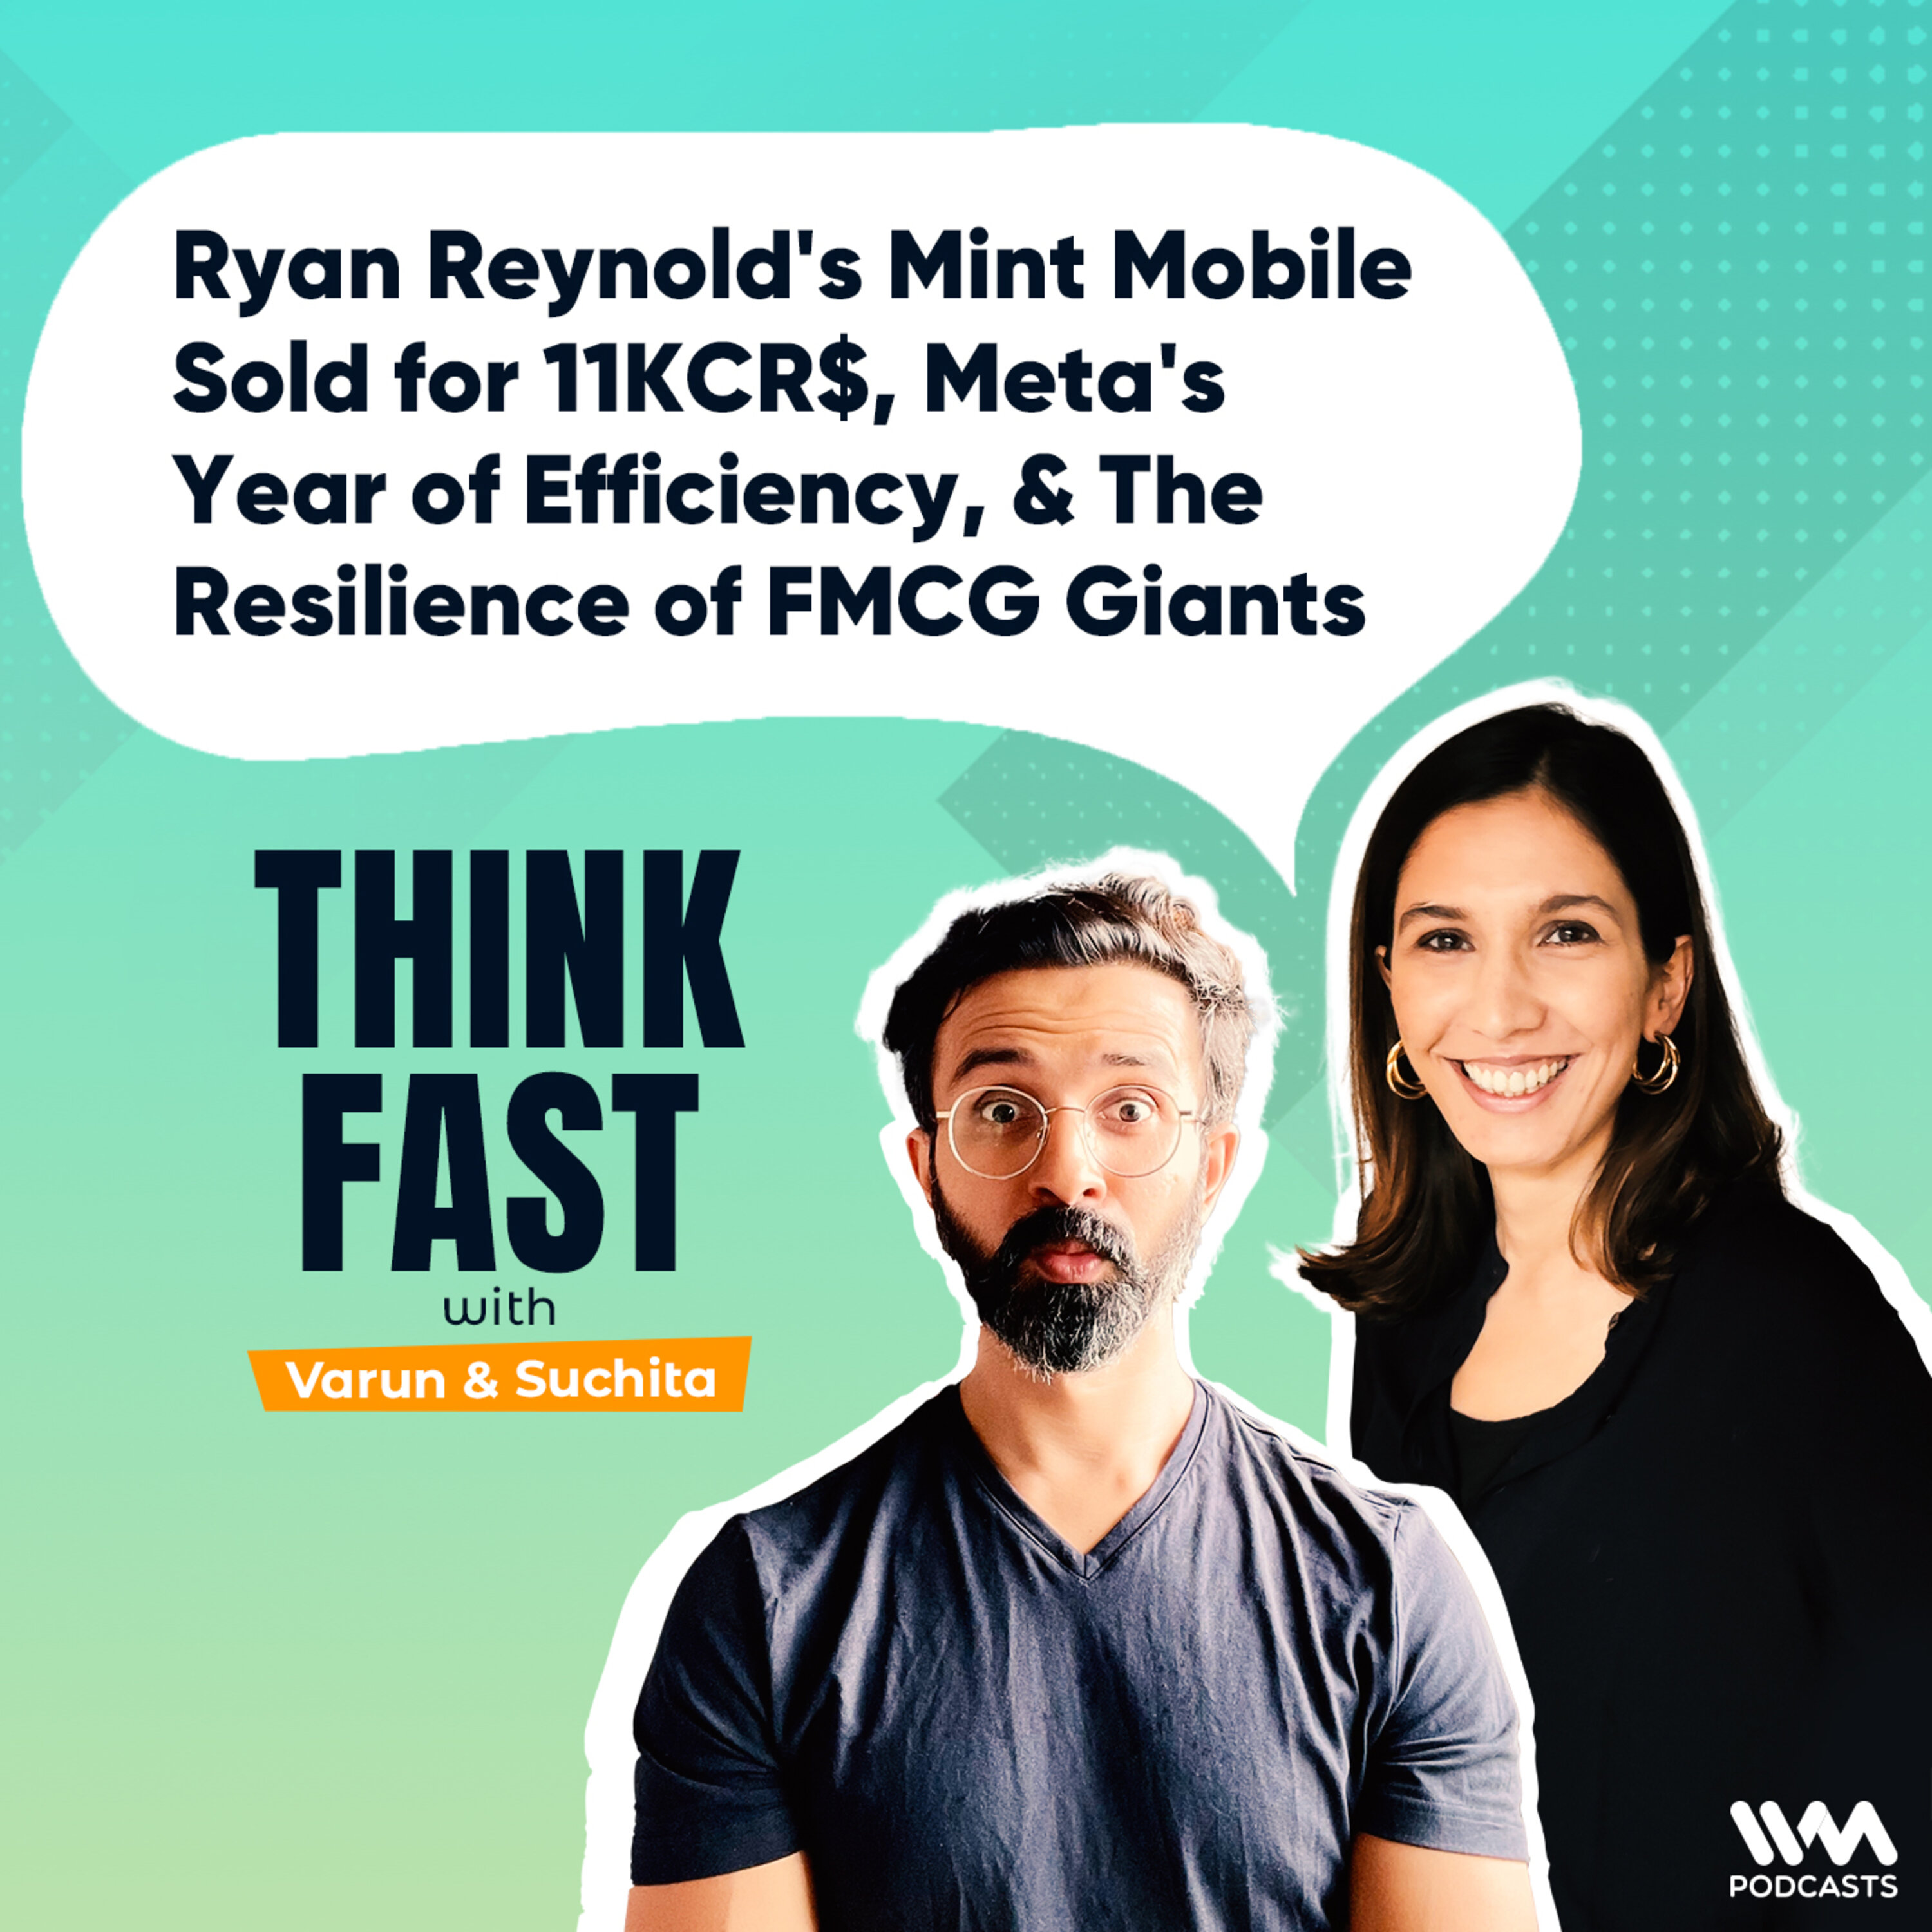 Ryan Reynold's Mint Mobile Sold for 11KCR$, Meta's Year of Efficiency, & The Resilience of FMCG Giants